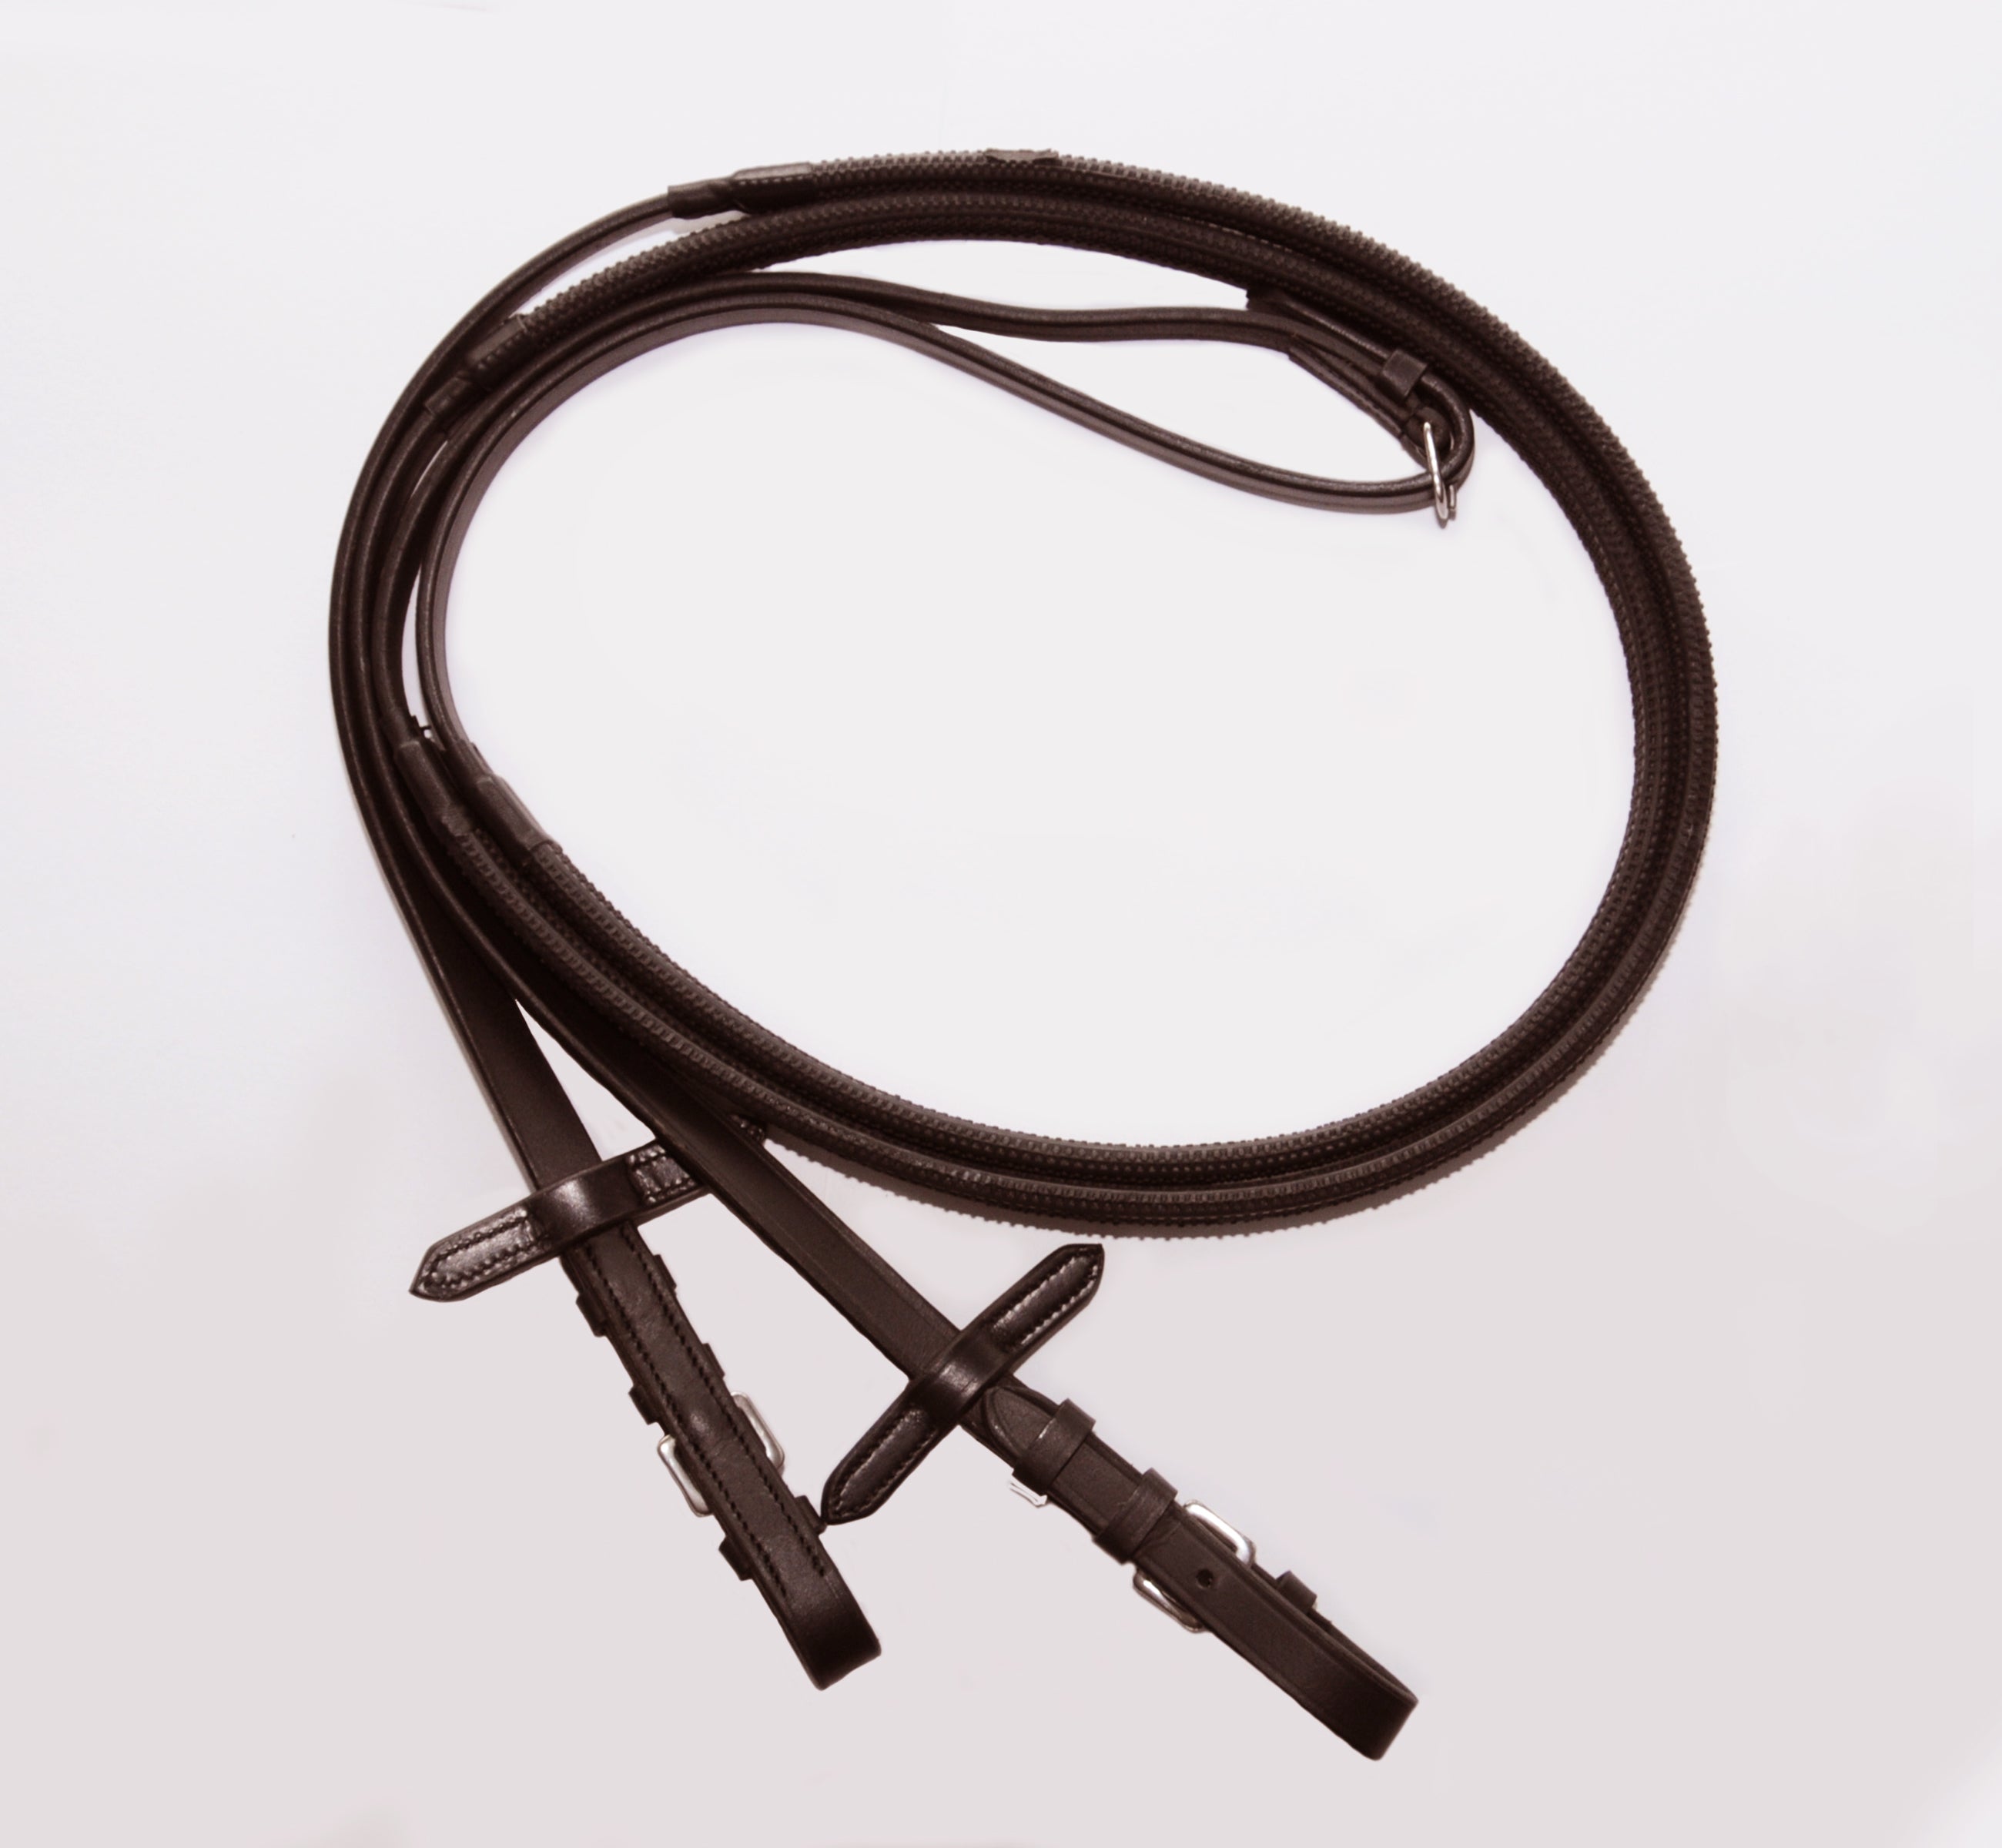 Turfmasters Classic Bridle with Reins